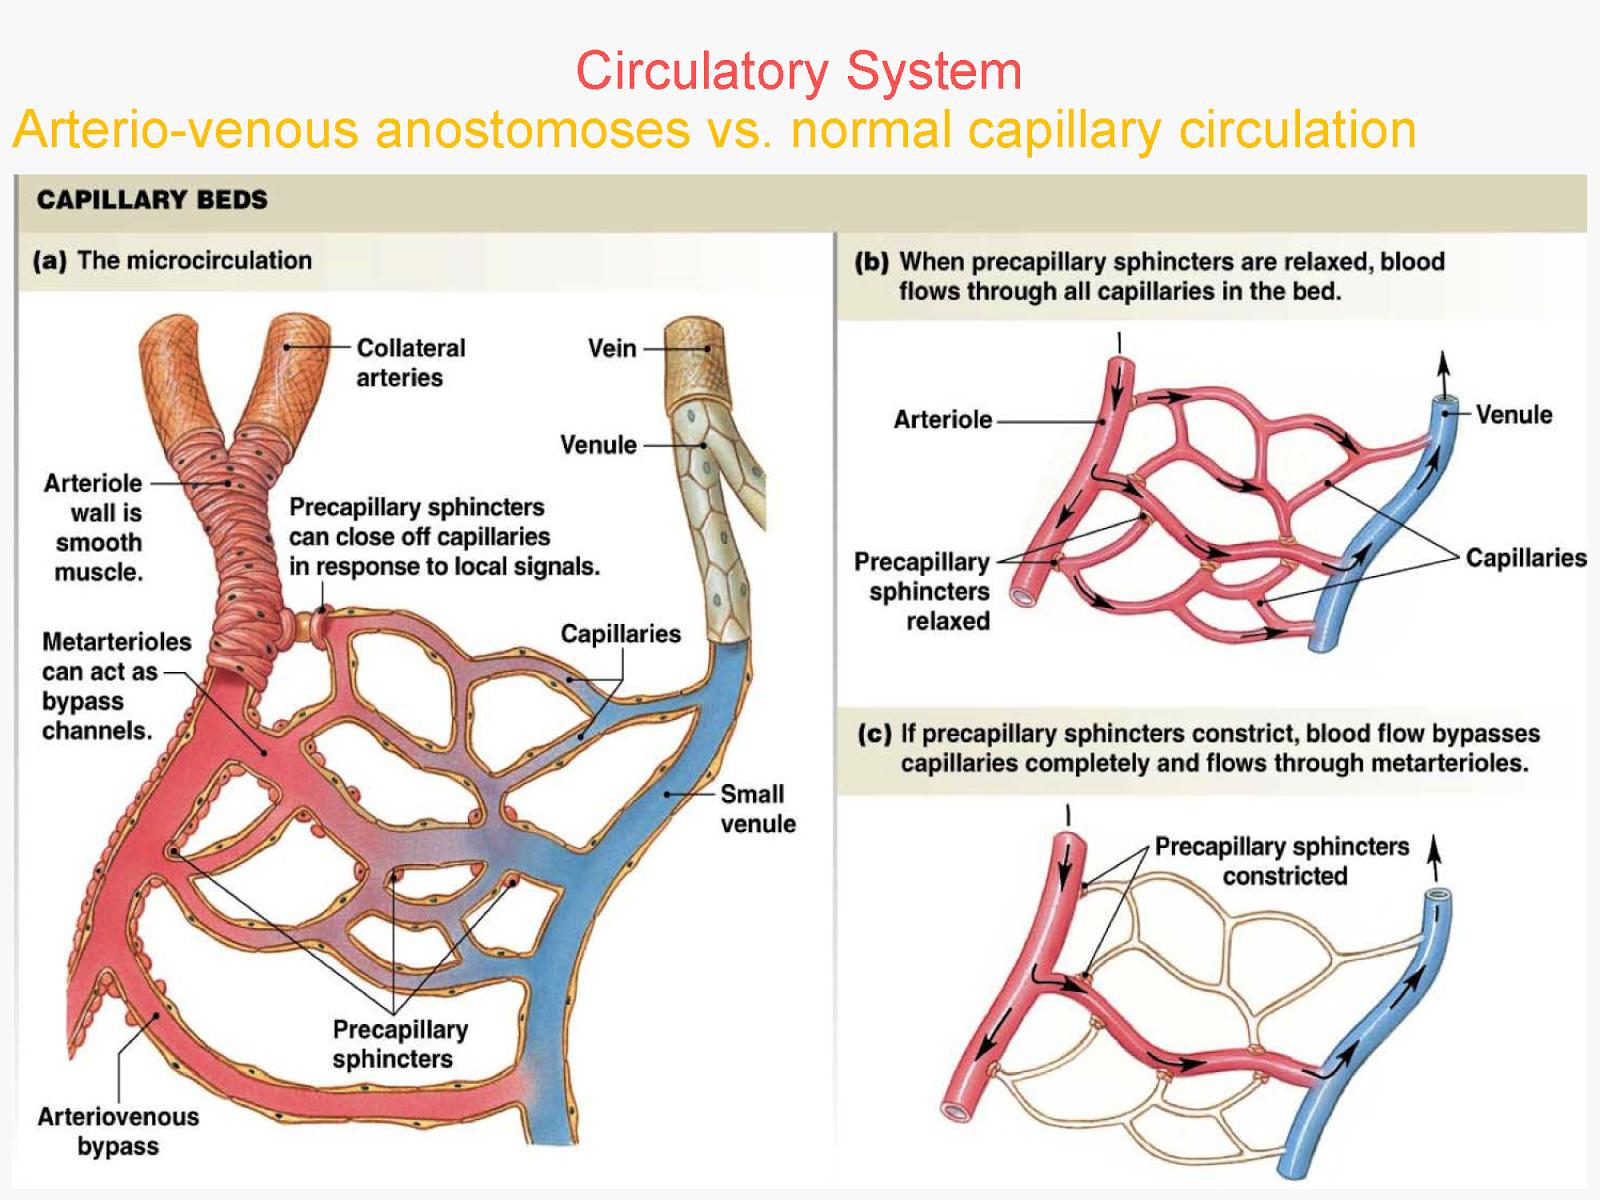 Circulatory System Pictures to Pin on Pinterest - PinsDaddy